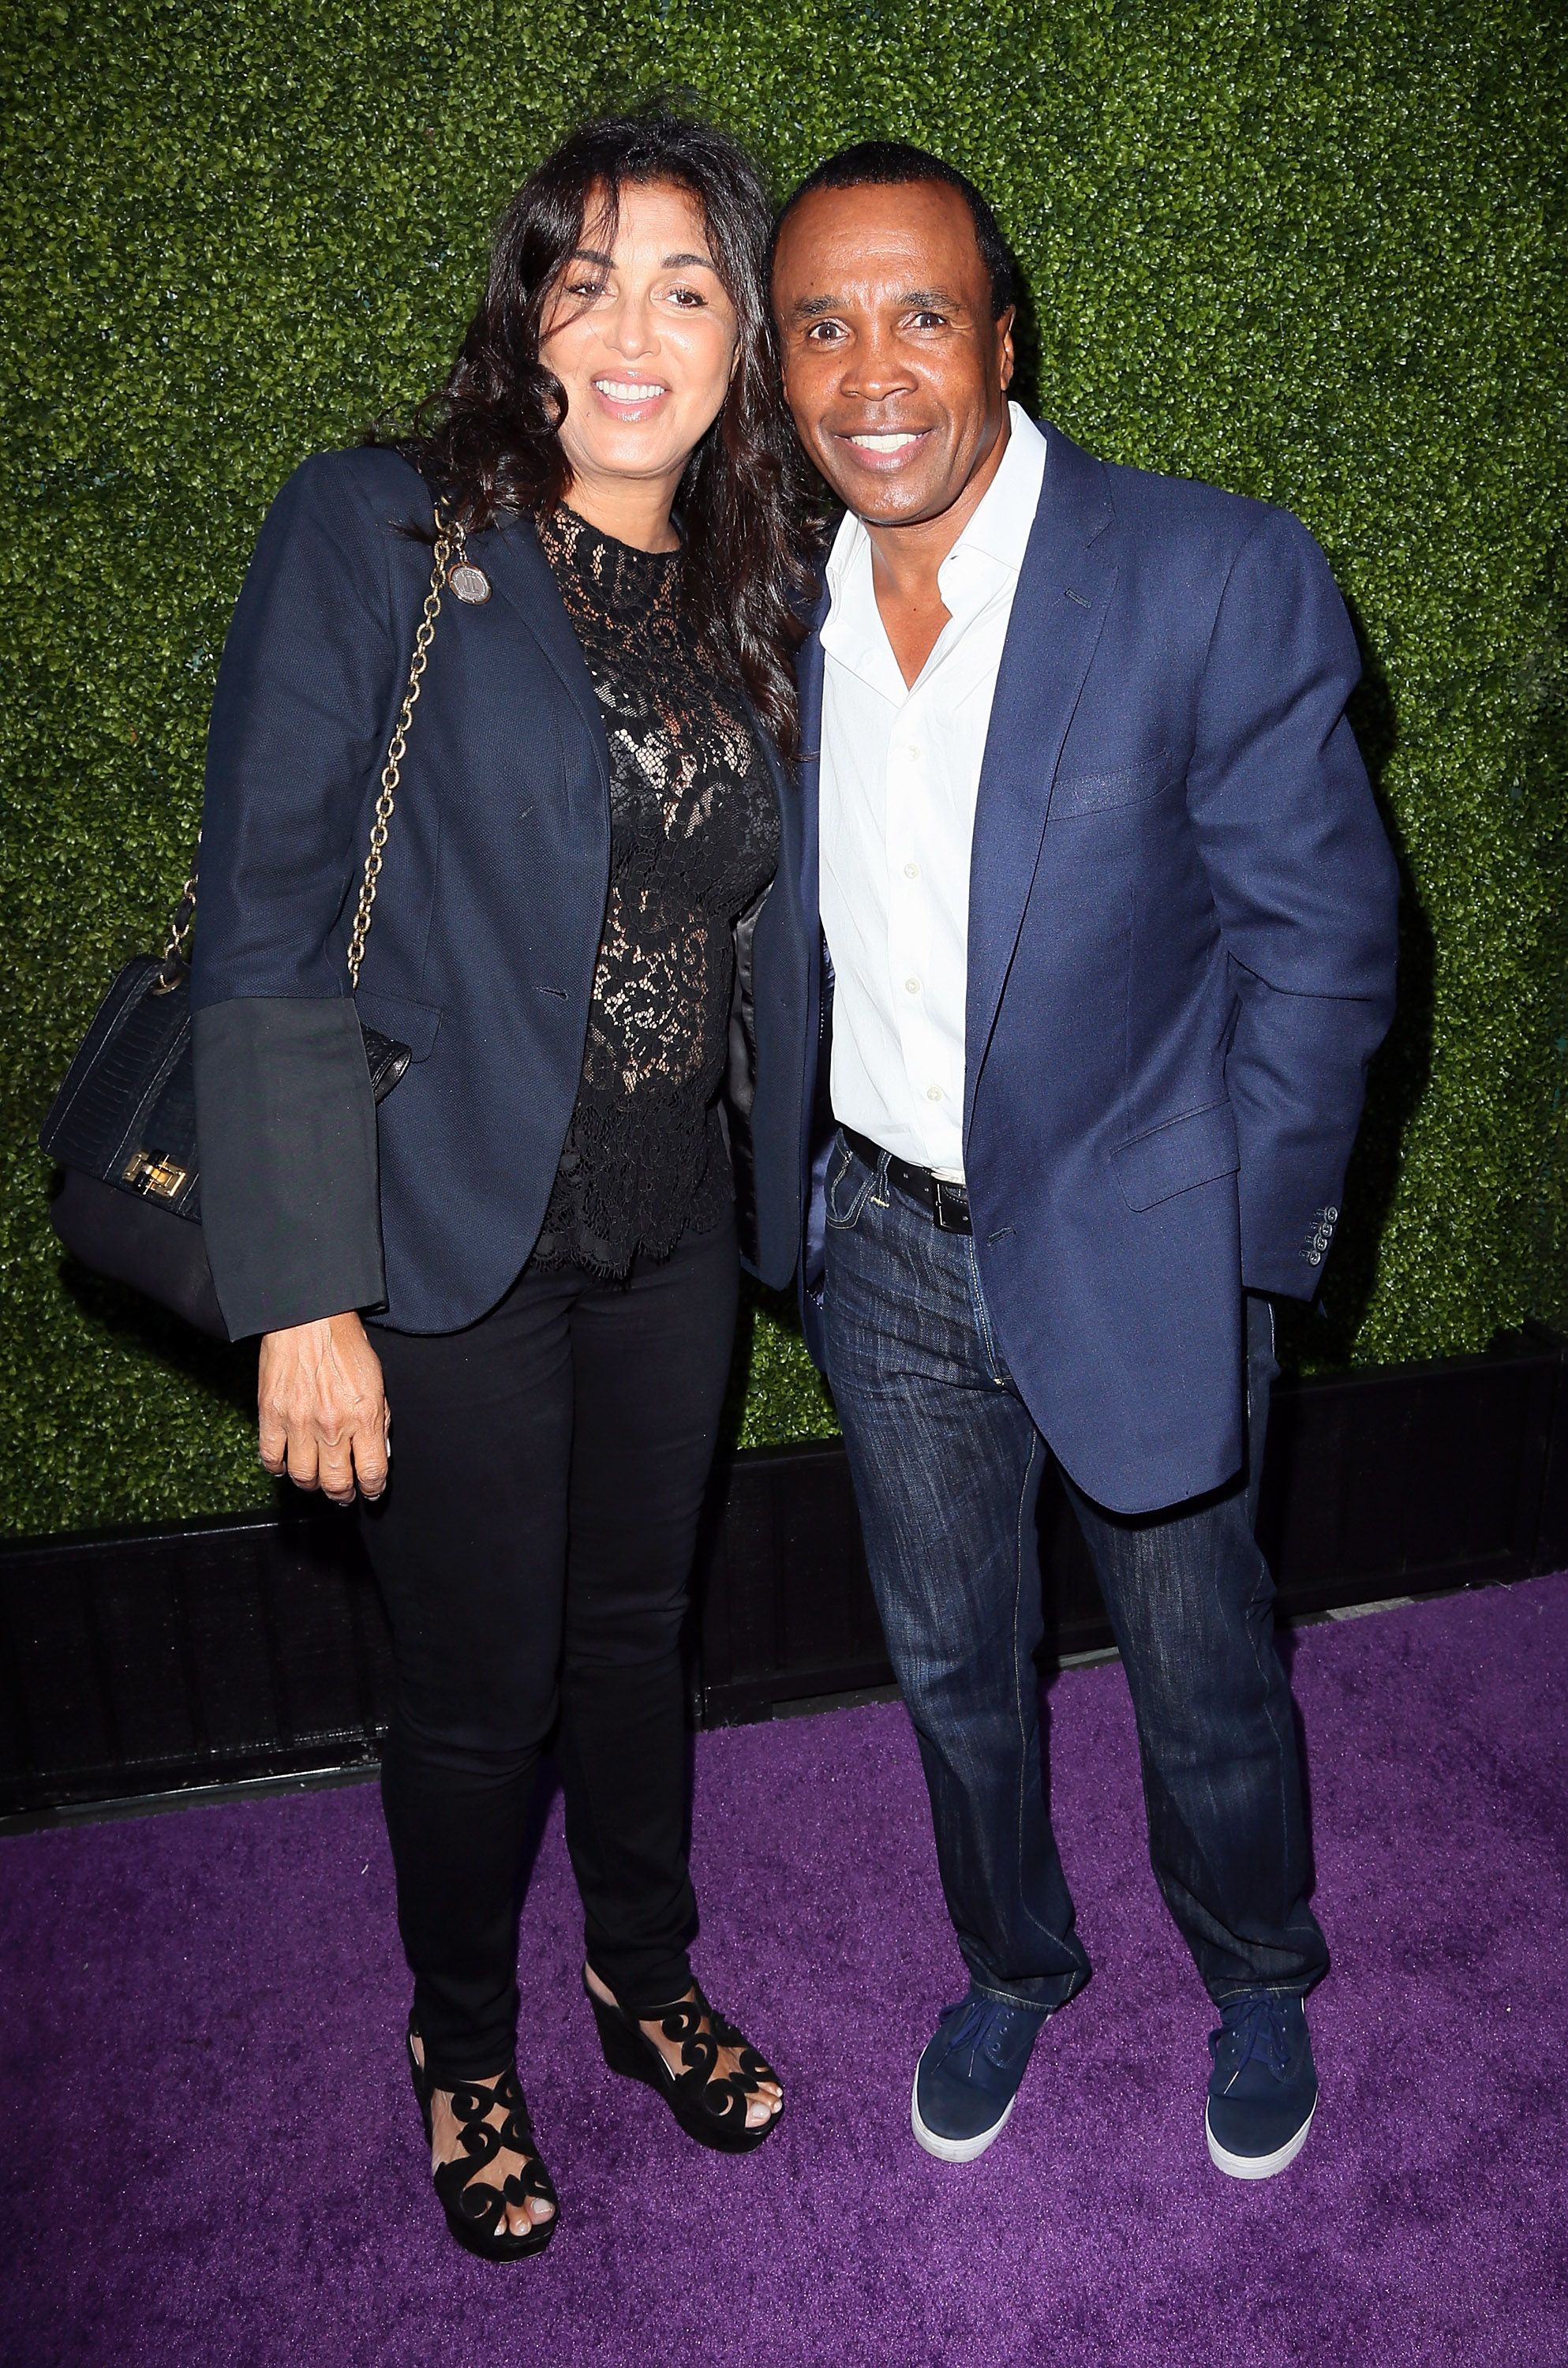 Sugar Ray Leonard and wife Bernadette Leonard at the HollyRod Foundation's 16th Annual DesignCare on July 19, 2014 in Los Angeles. │Photo: Getty Images